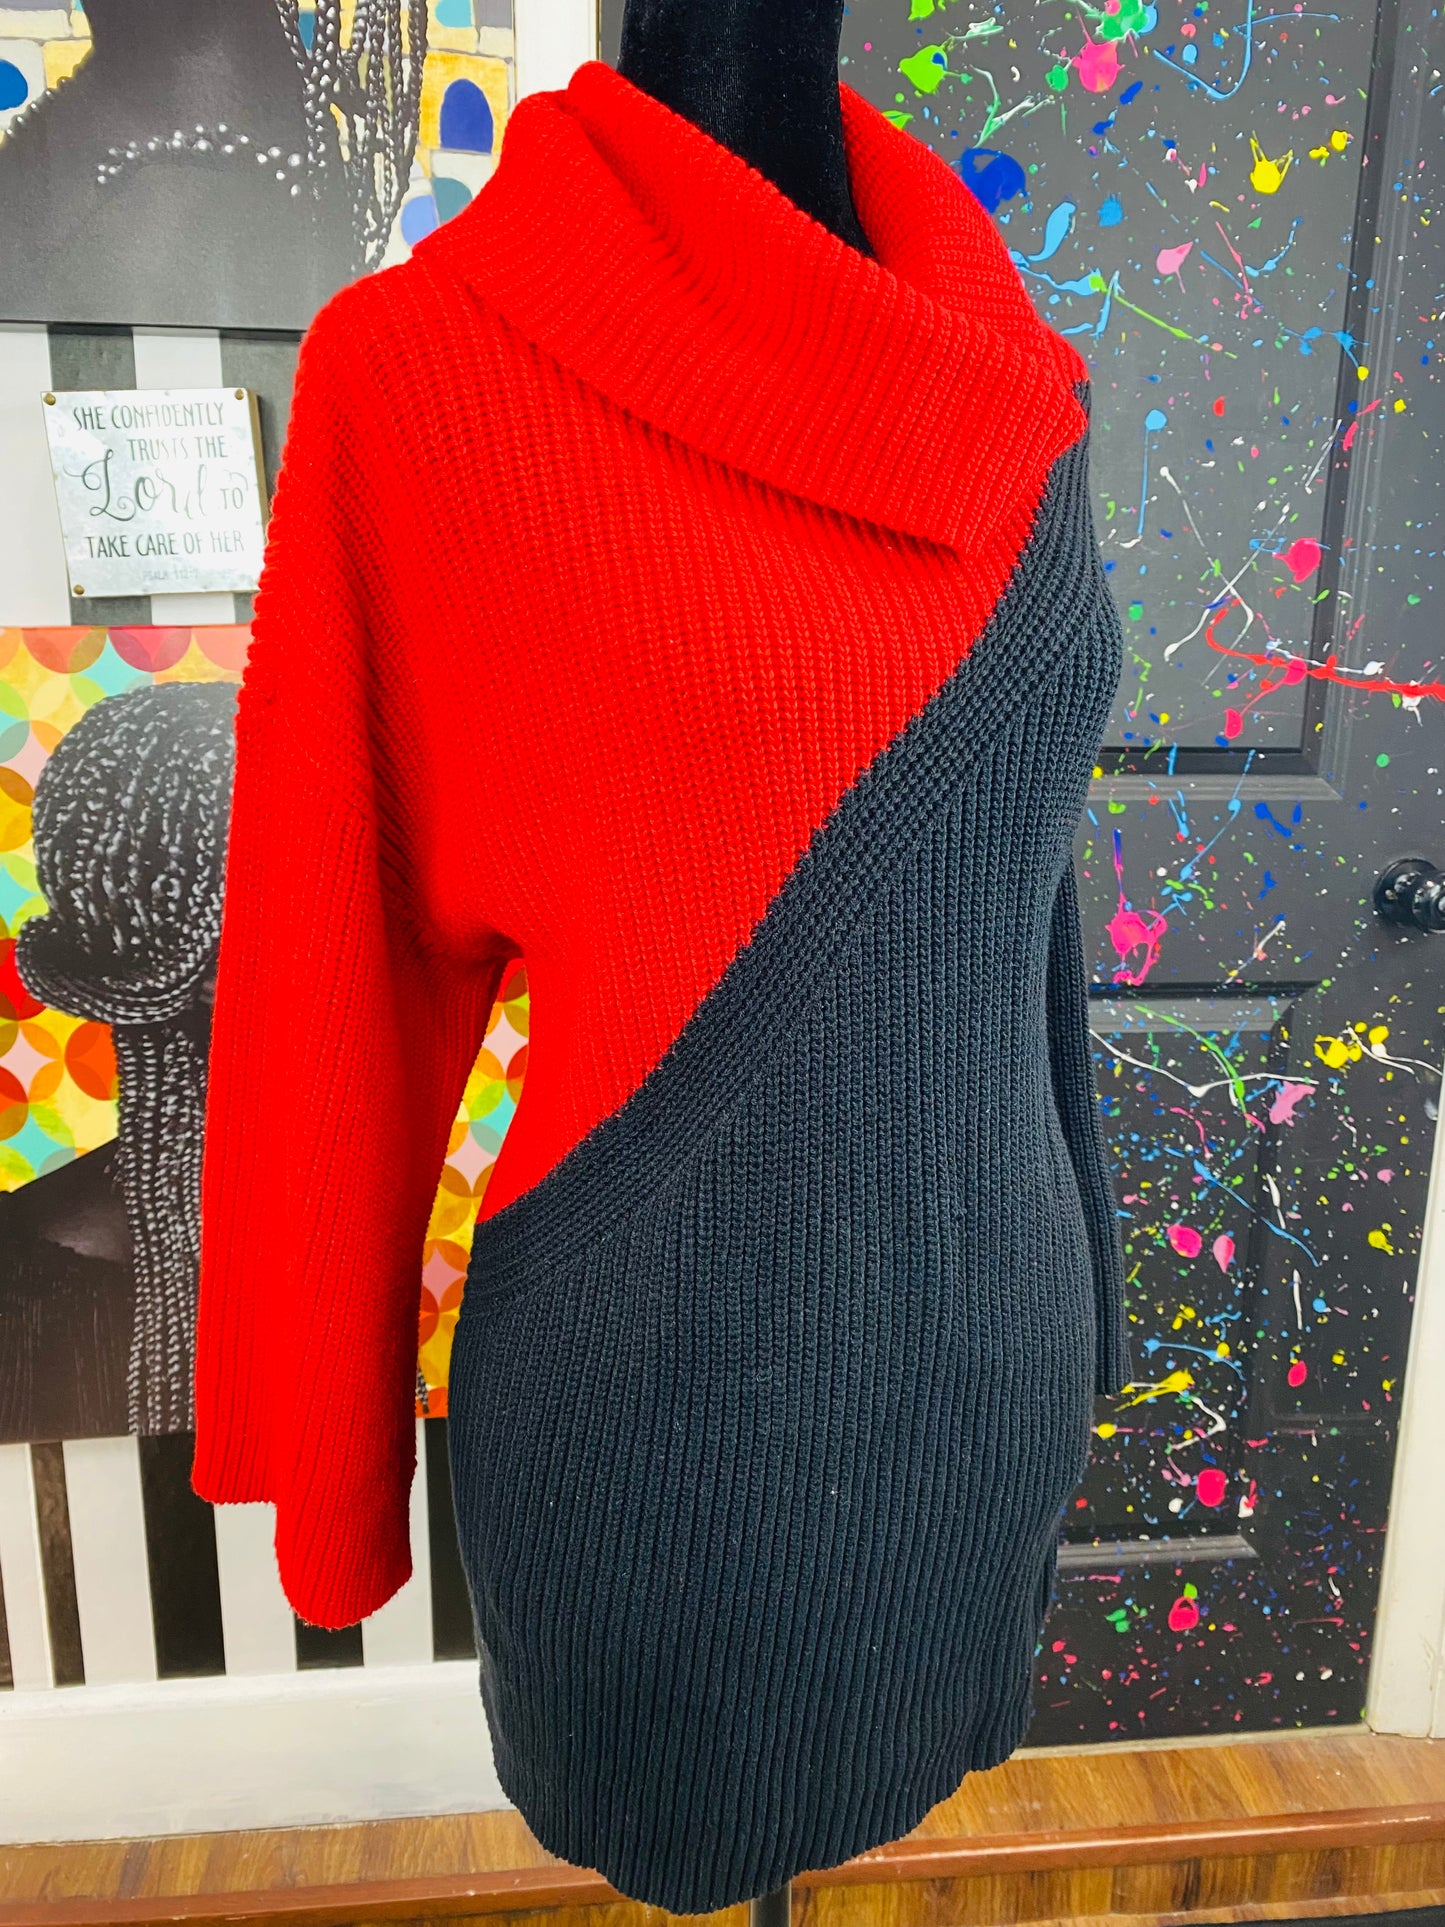 Vintage Black and Red Sweater